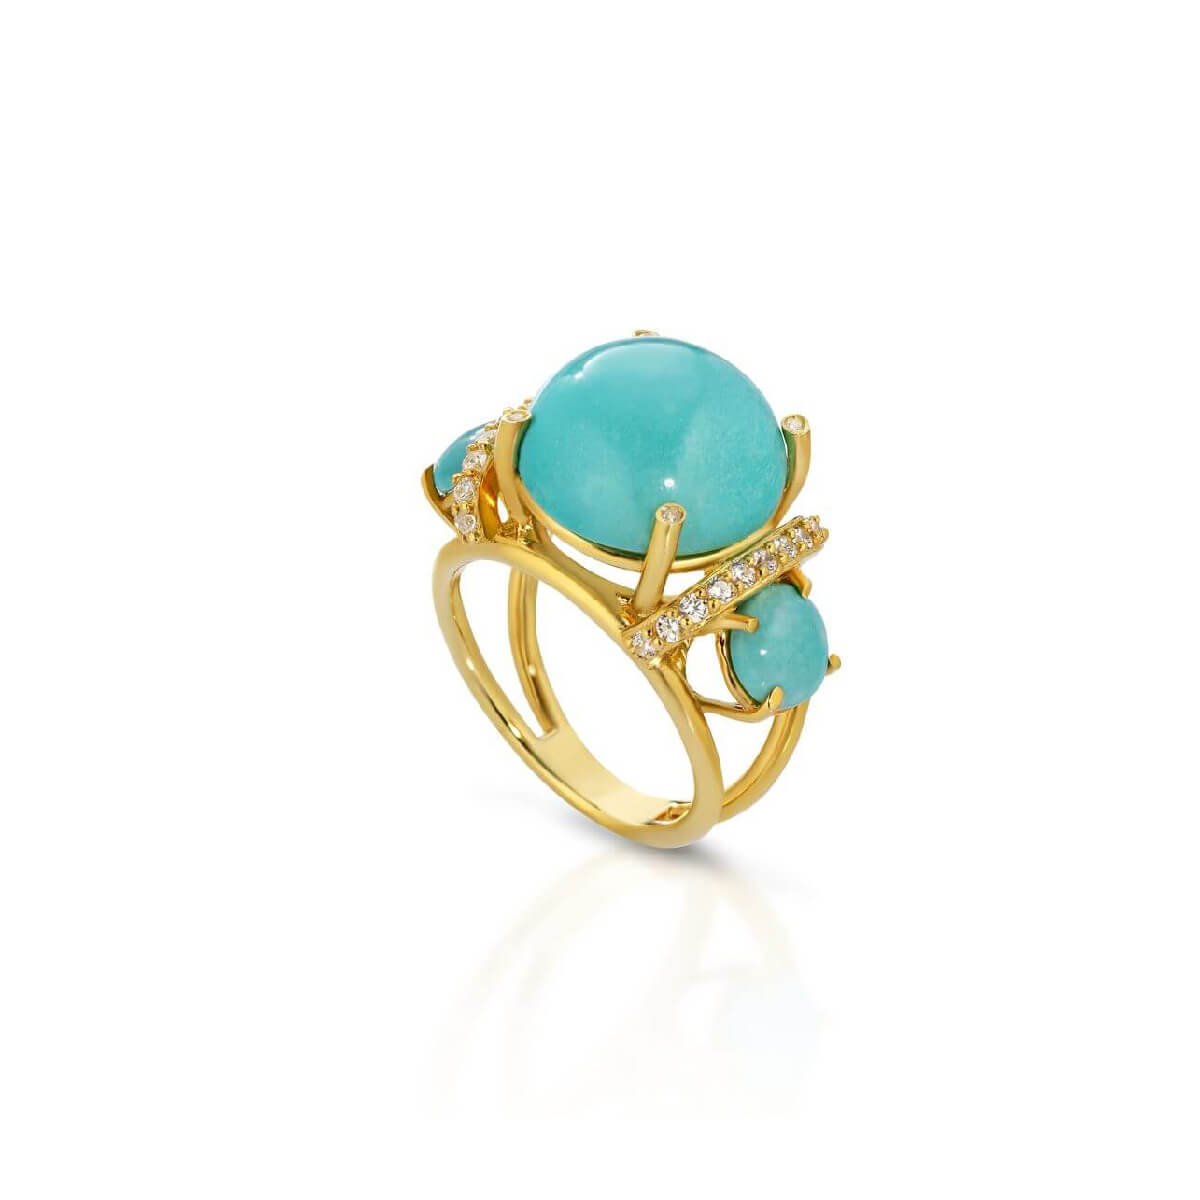 Reconstituted turquoise and diamond ring